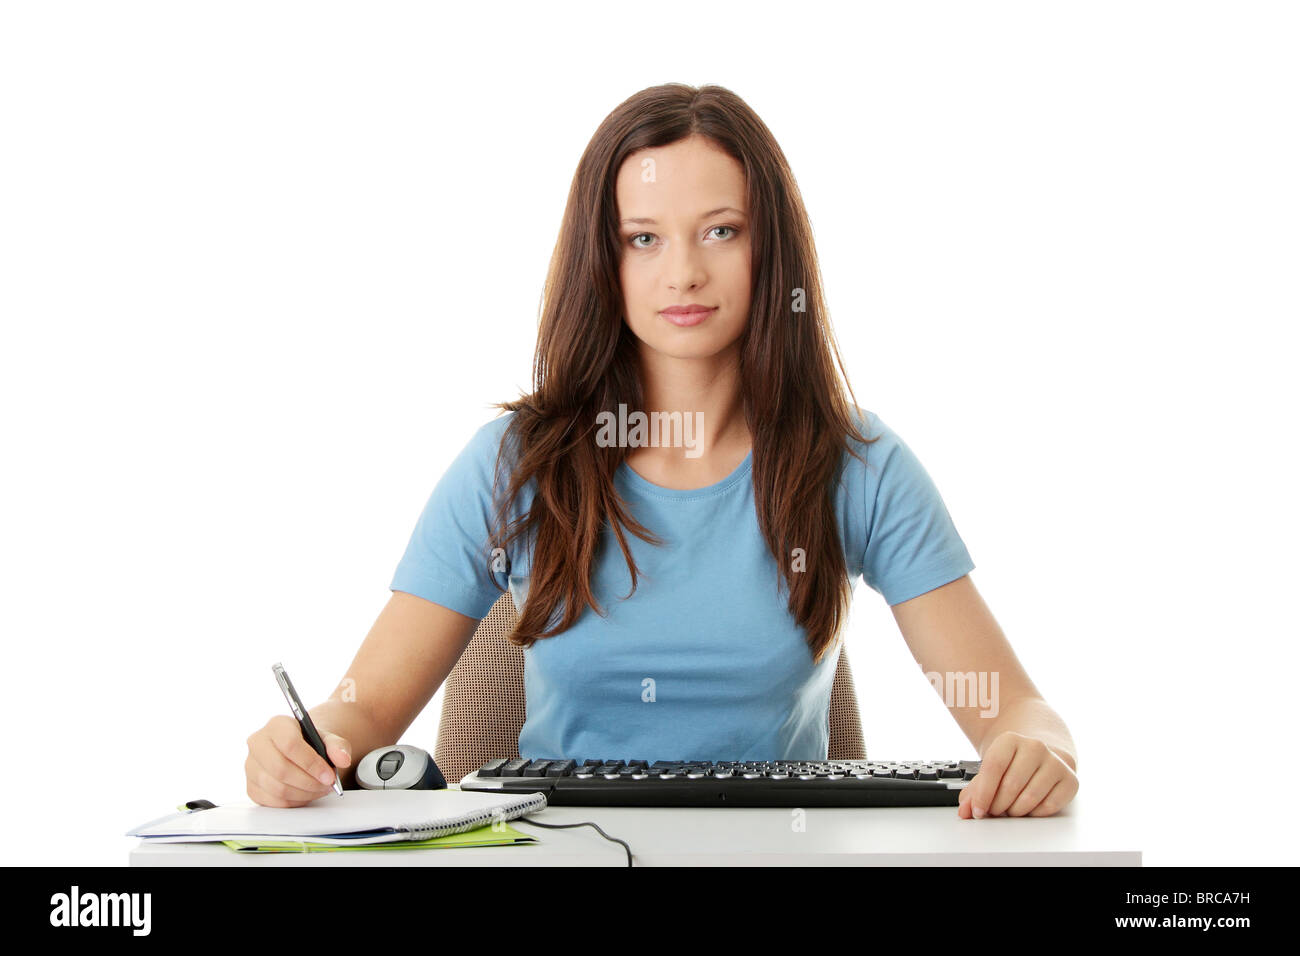 Teen Girl Learning At The Desk E Learning Concept Isolated On